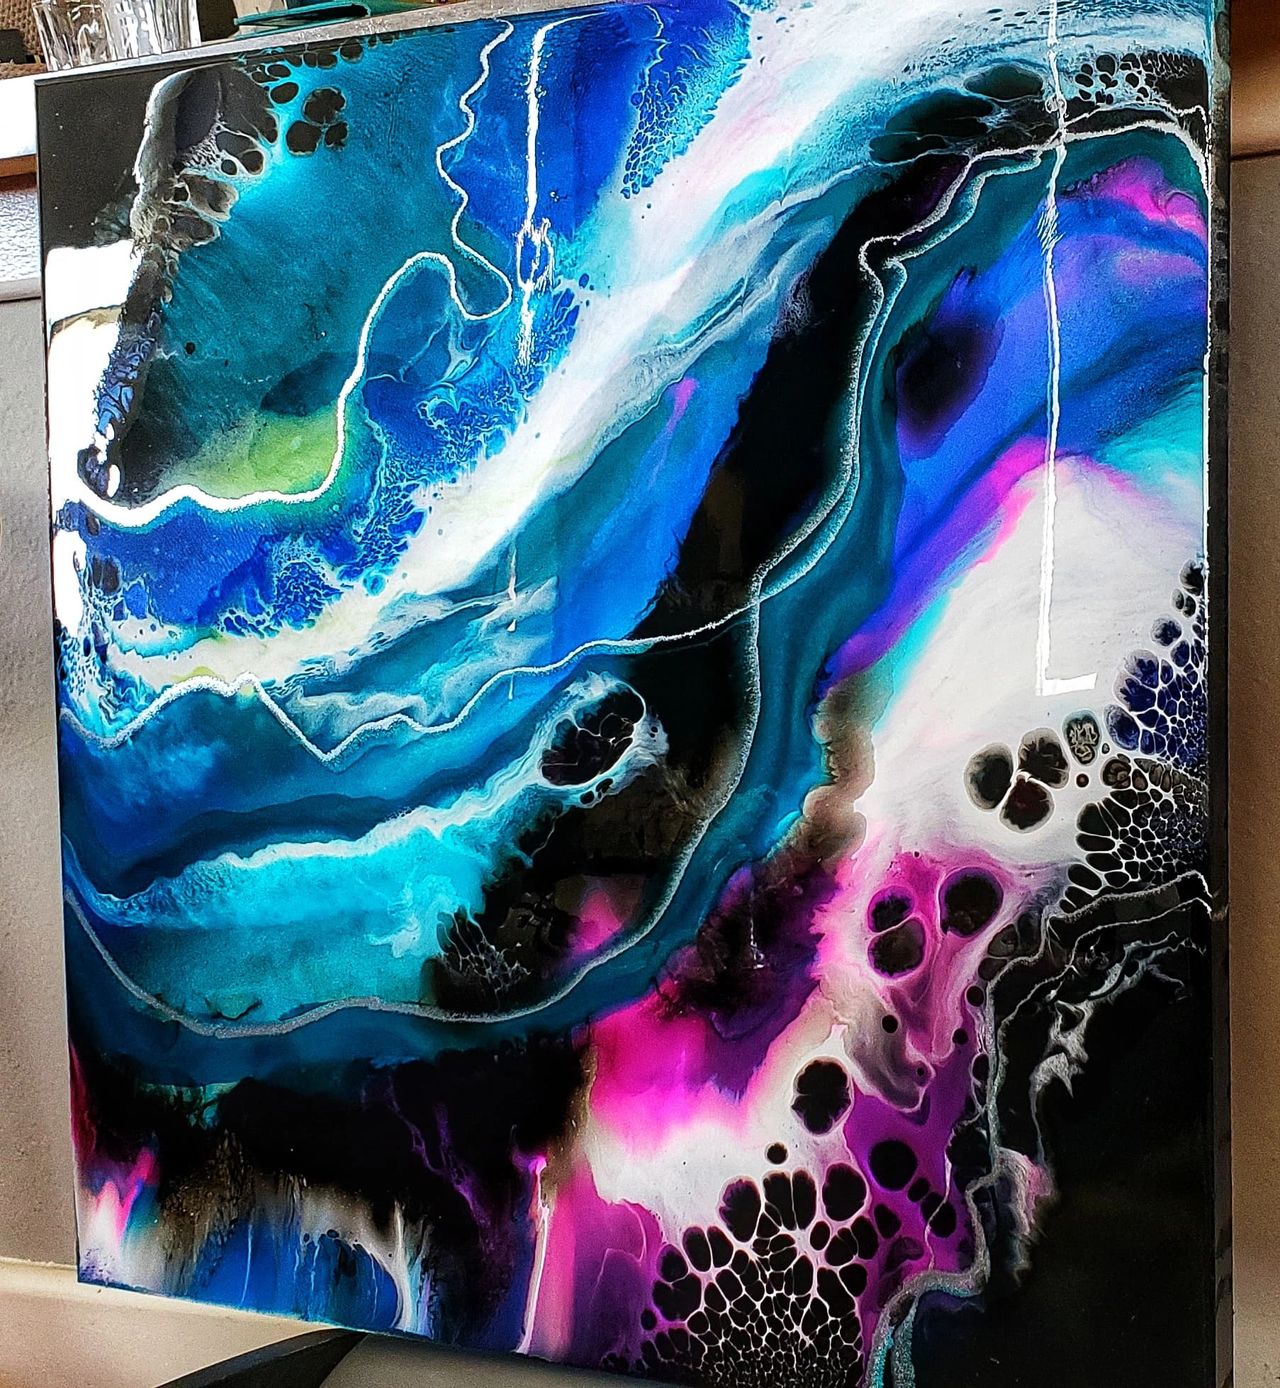 Acrylic Pouring for Beginners, Making Cells with Silicone & Isopropyl  Alcohol (Video)